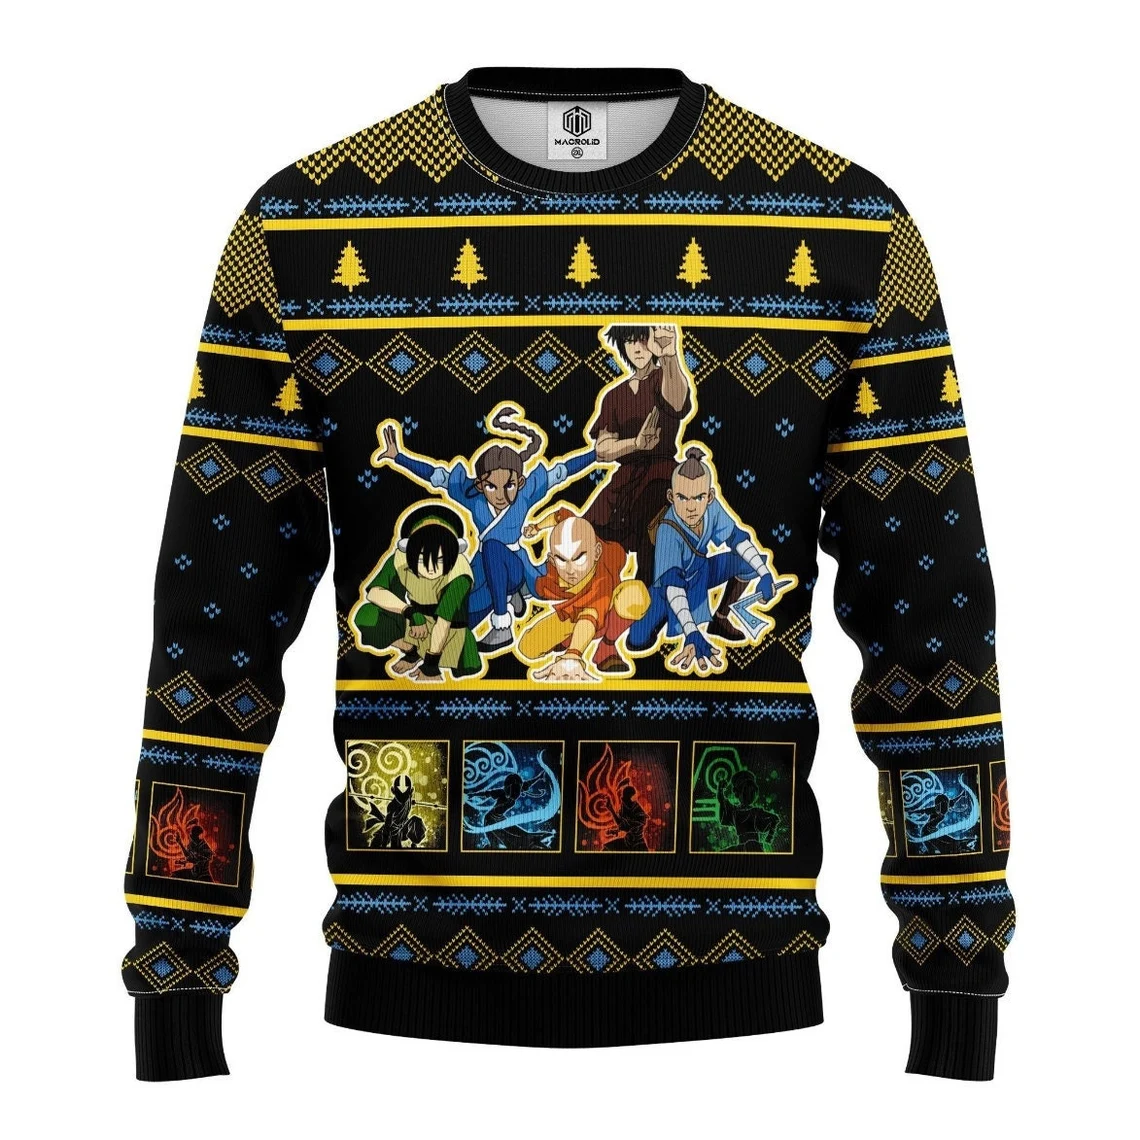 Avatar The Last Airbender Ugly Knitted Christmas Sweater